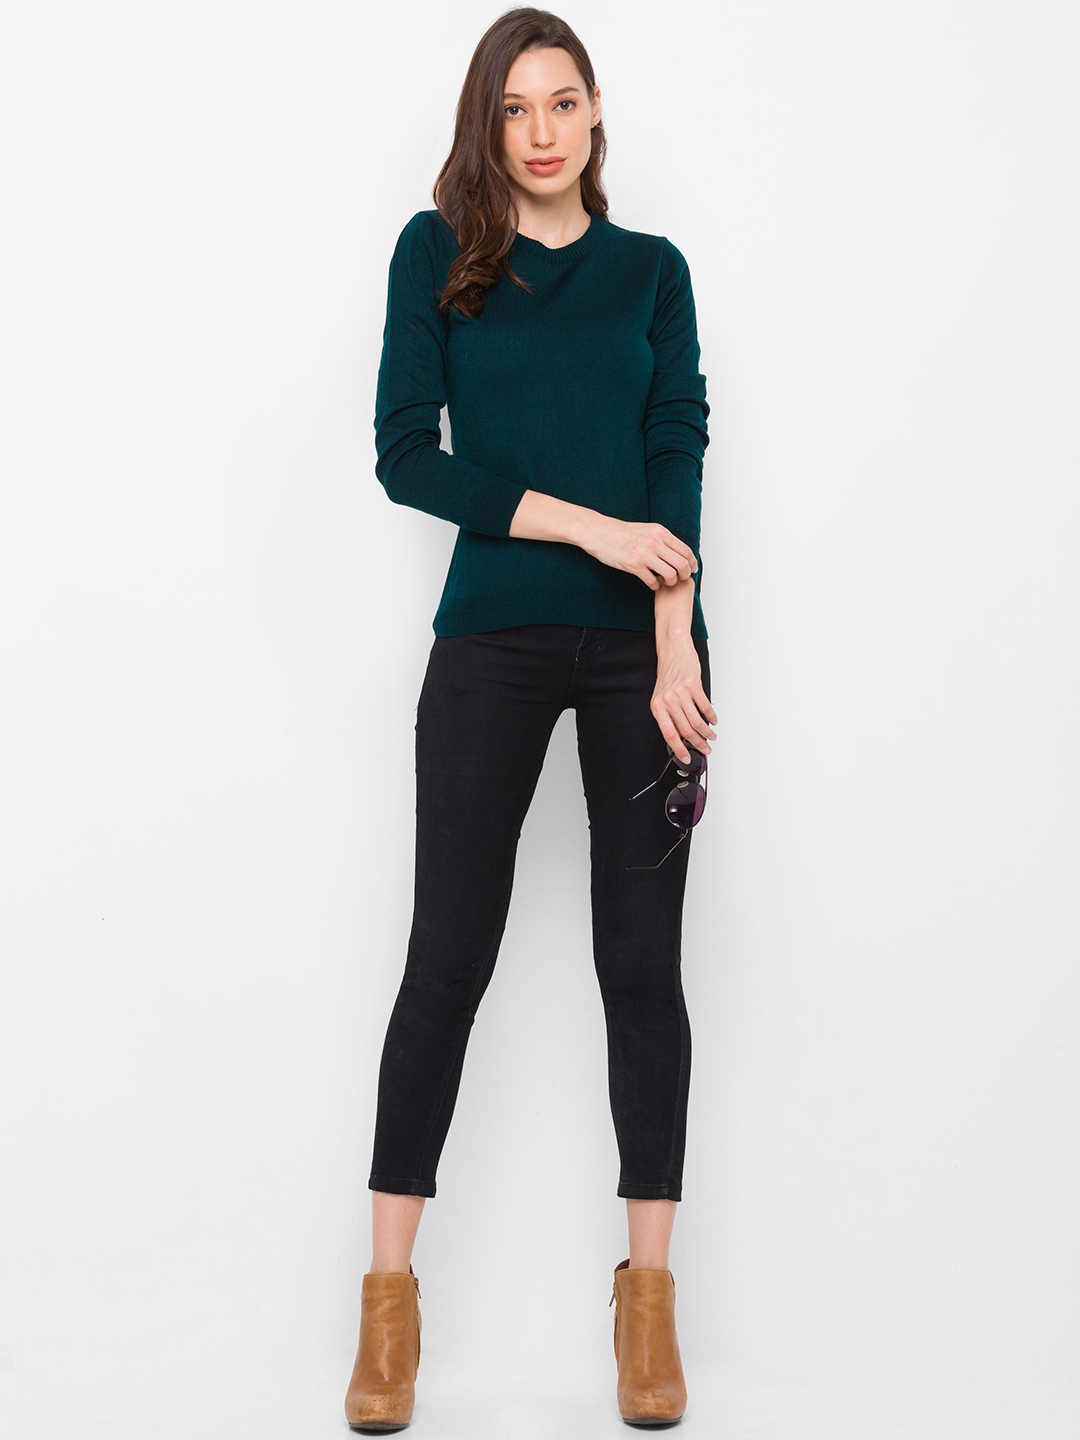 globus | Green Solid Sweater 1